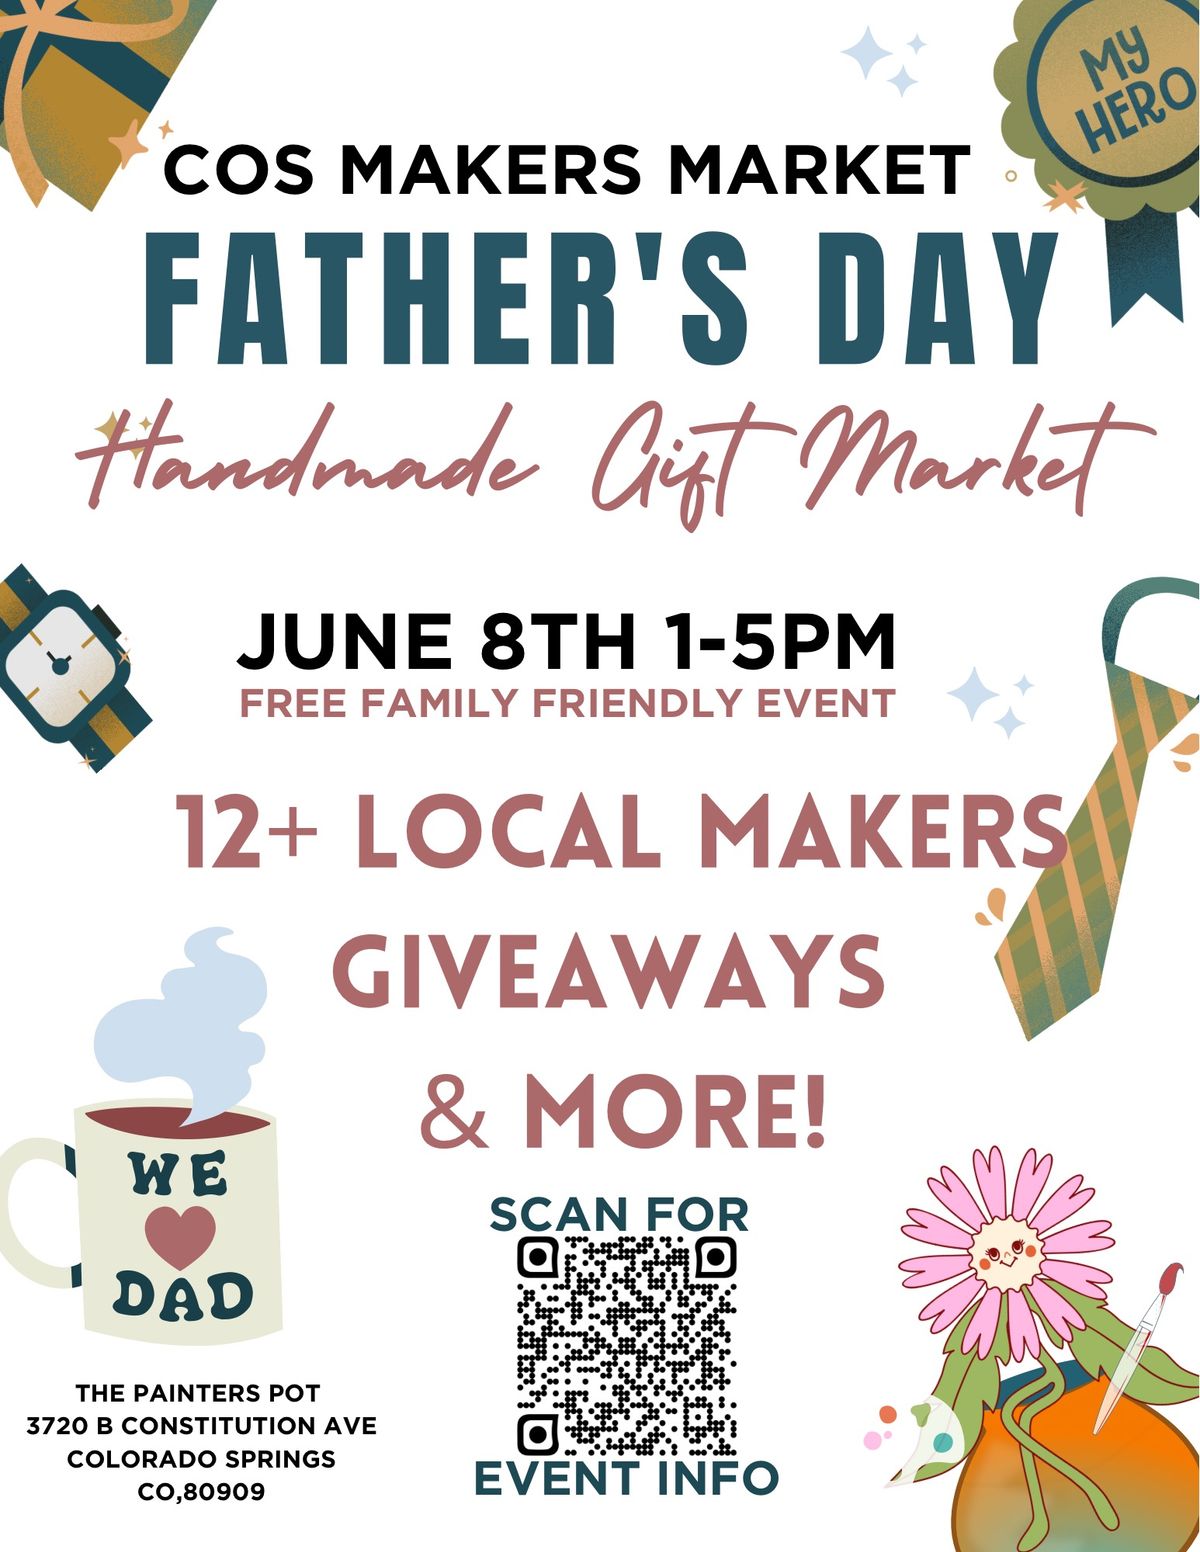 Fathers Day Handmade Gift Market FREE FAMILYFRIENDLY EVENT 